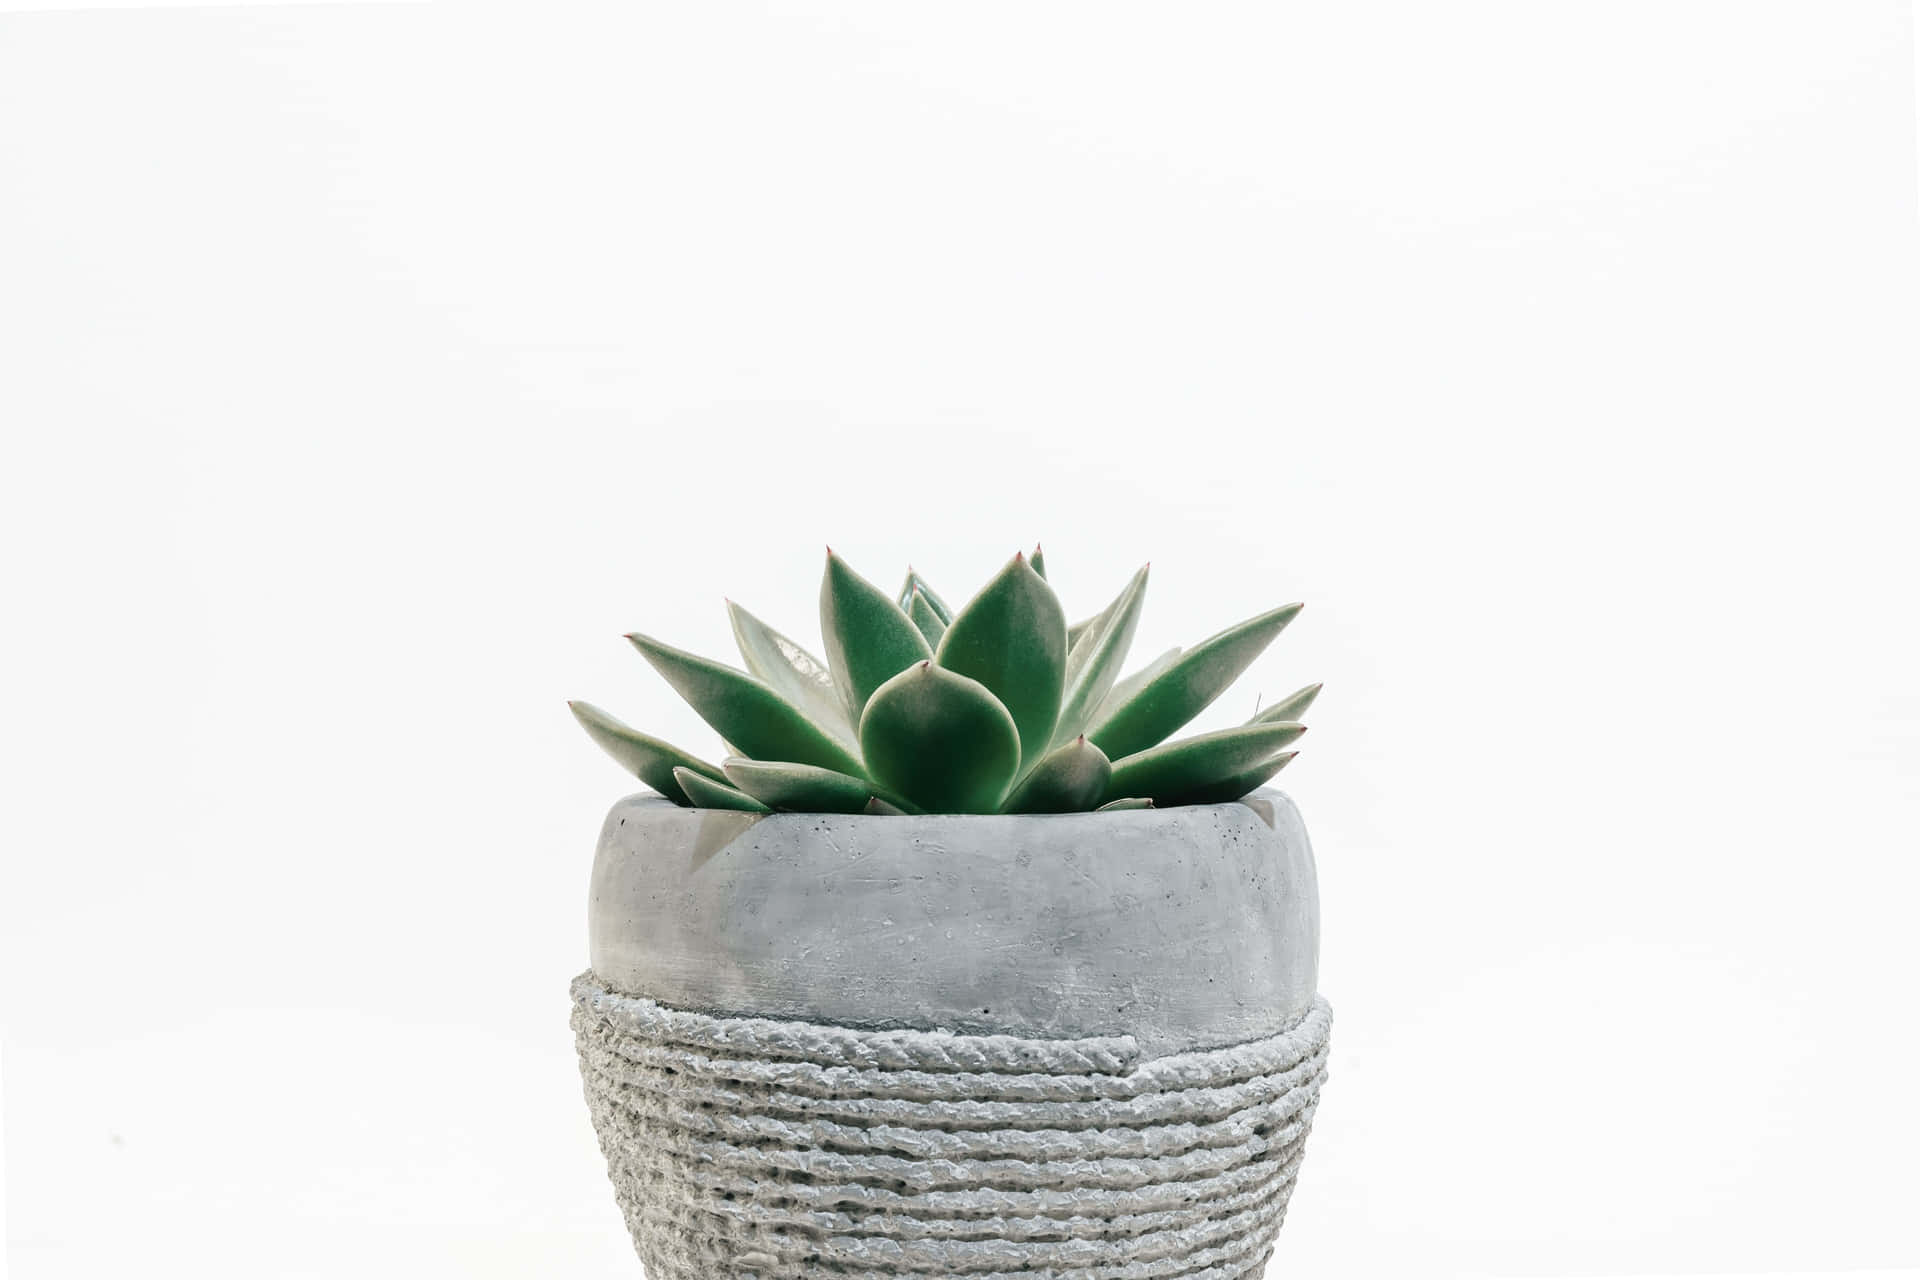 A Small Plant In A Grey Pot